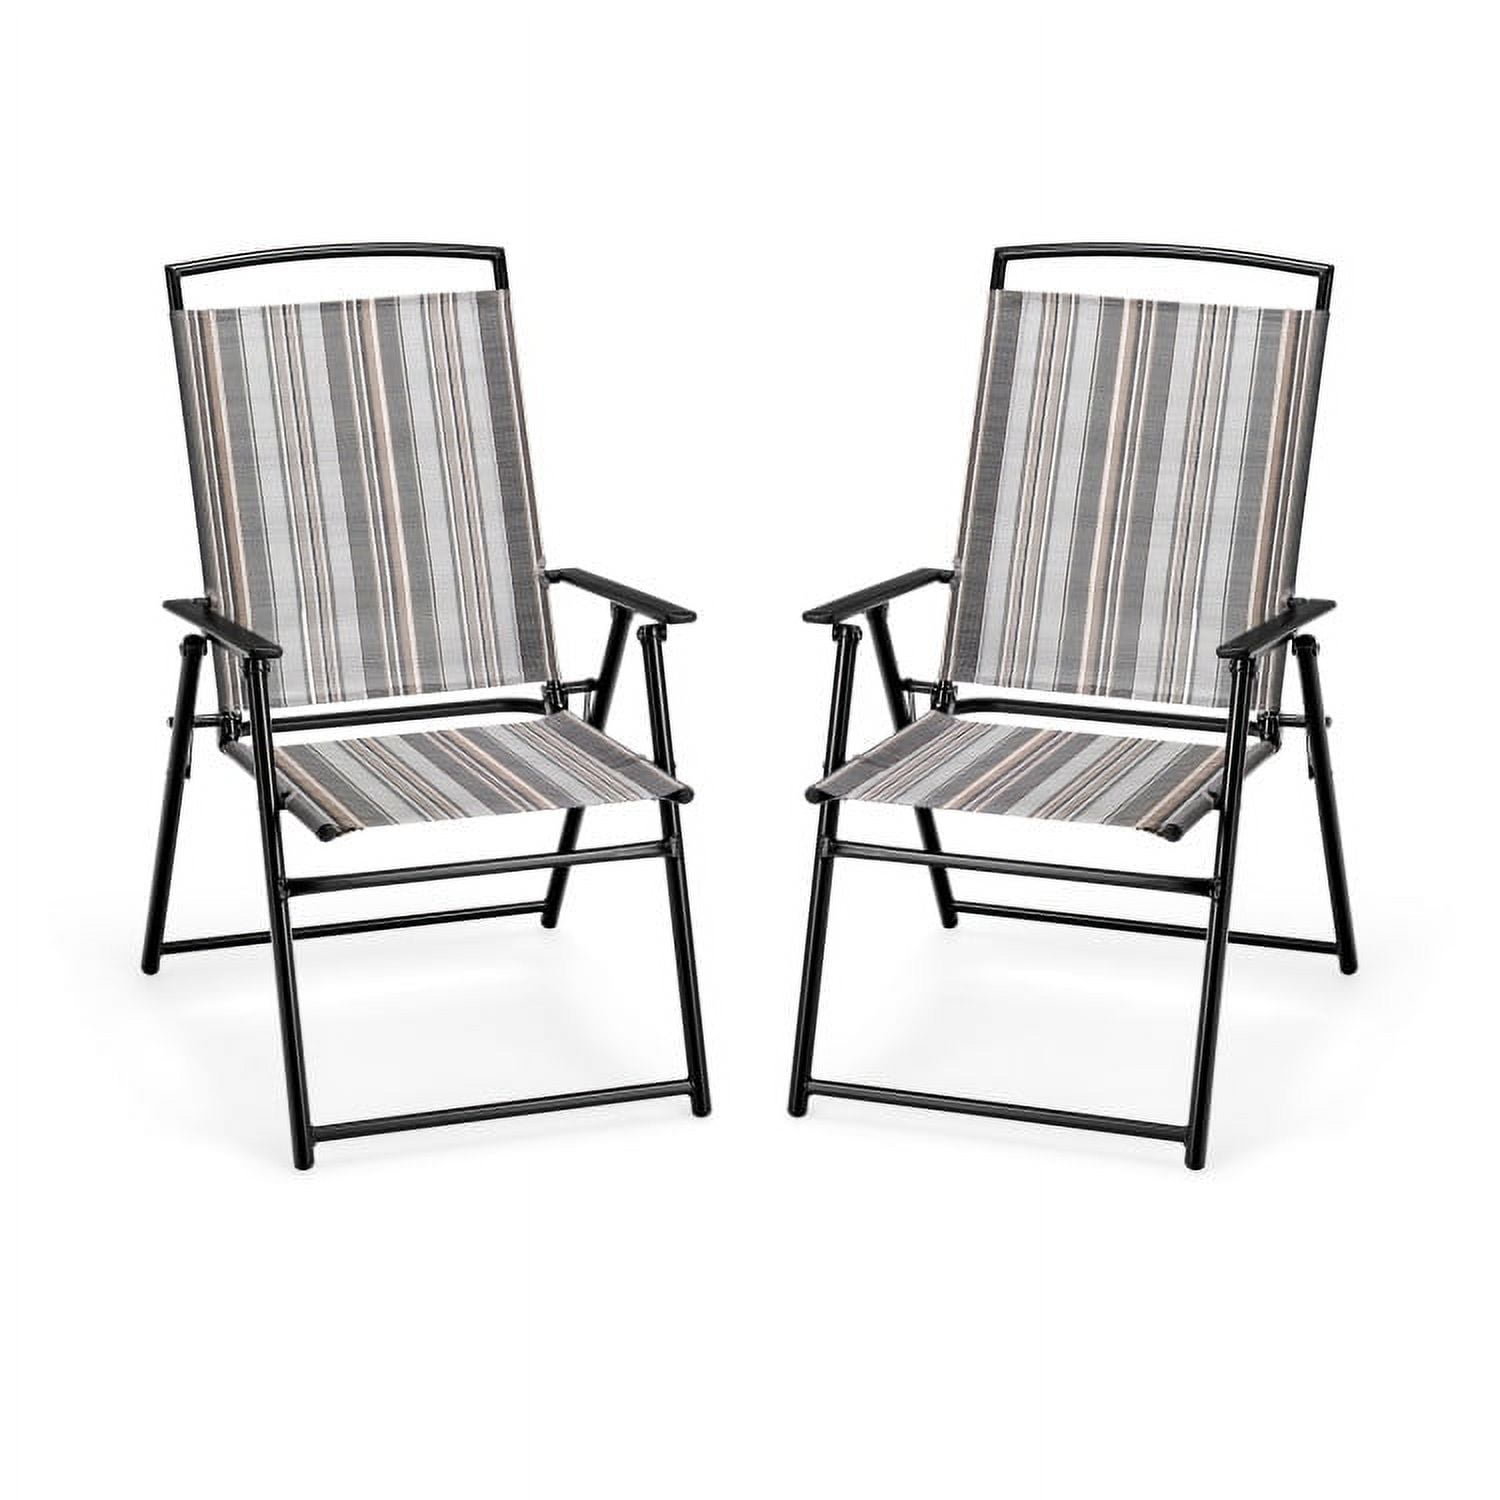 Aimee Lii Set of 2 Patio Folding Sling Chairs Space, Outdoor Patio Furniture, Gray